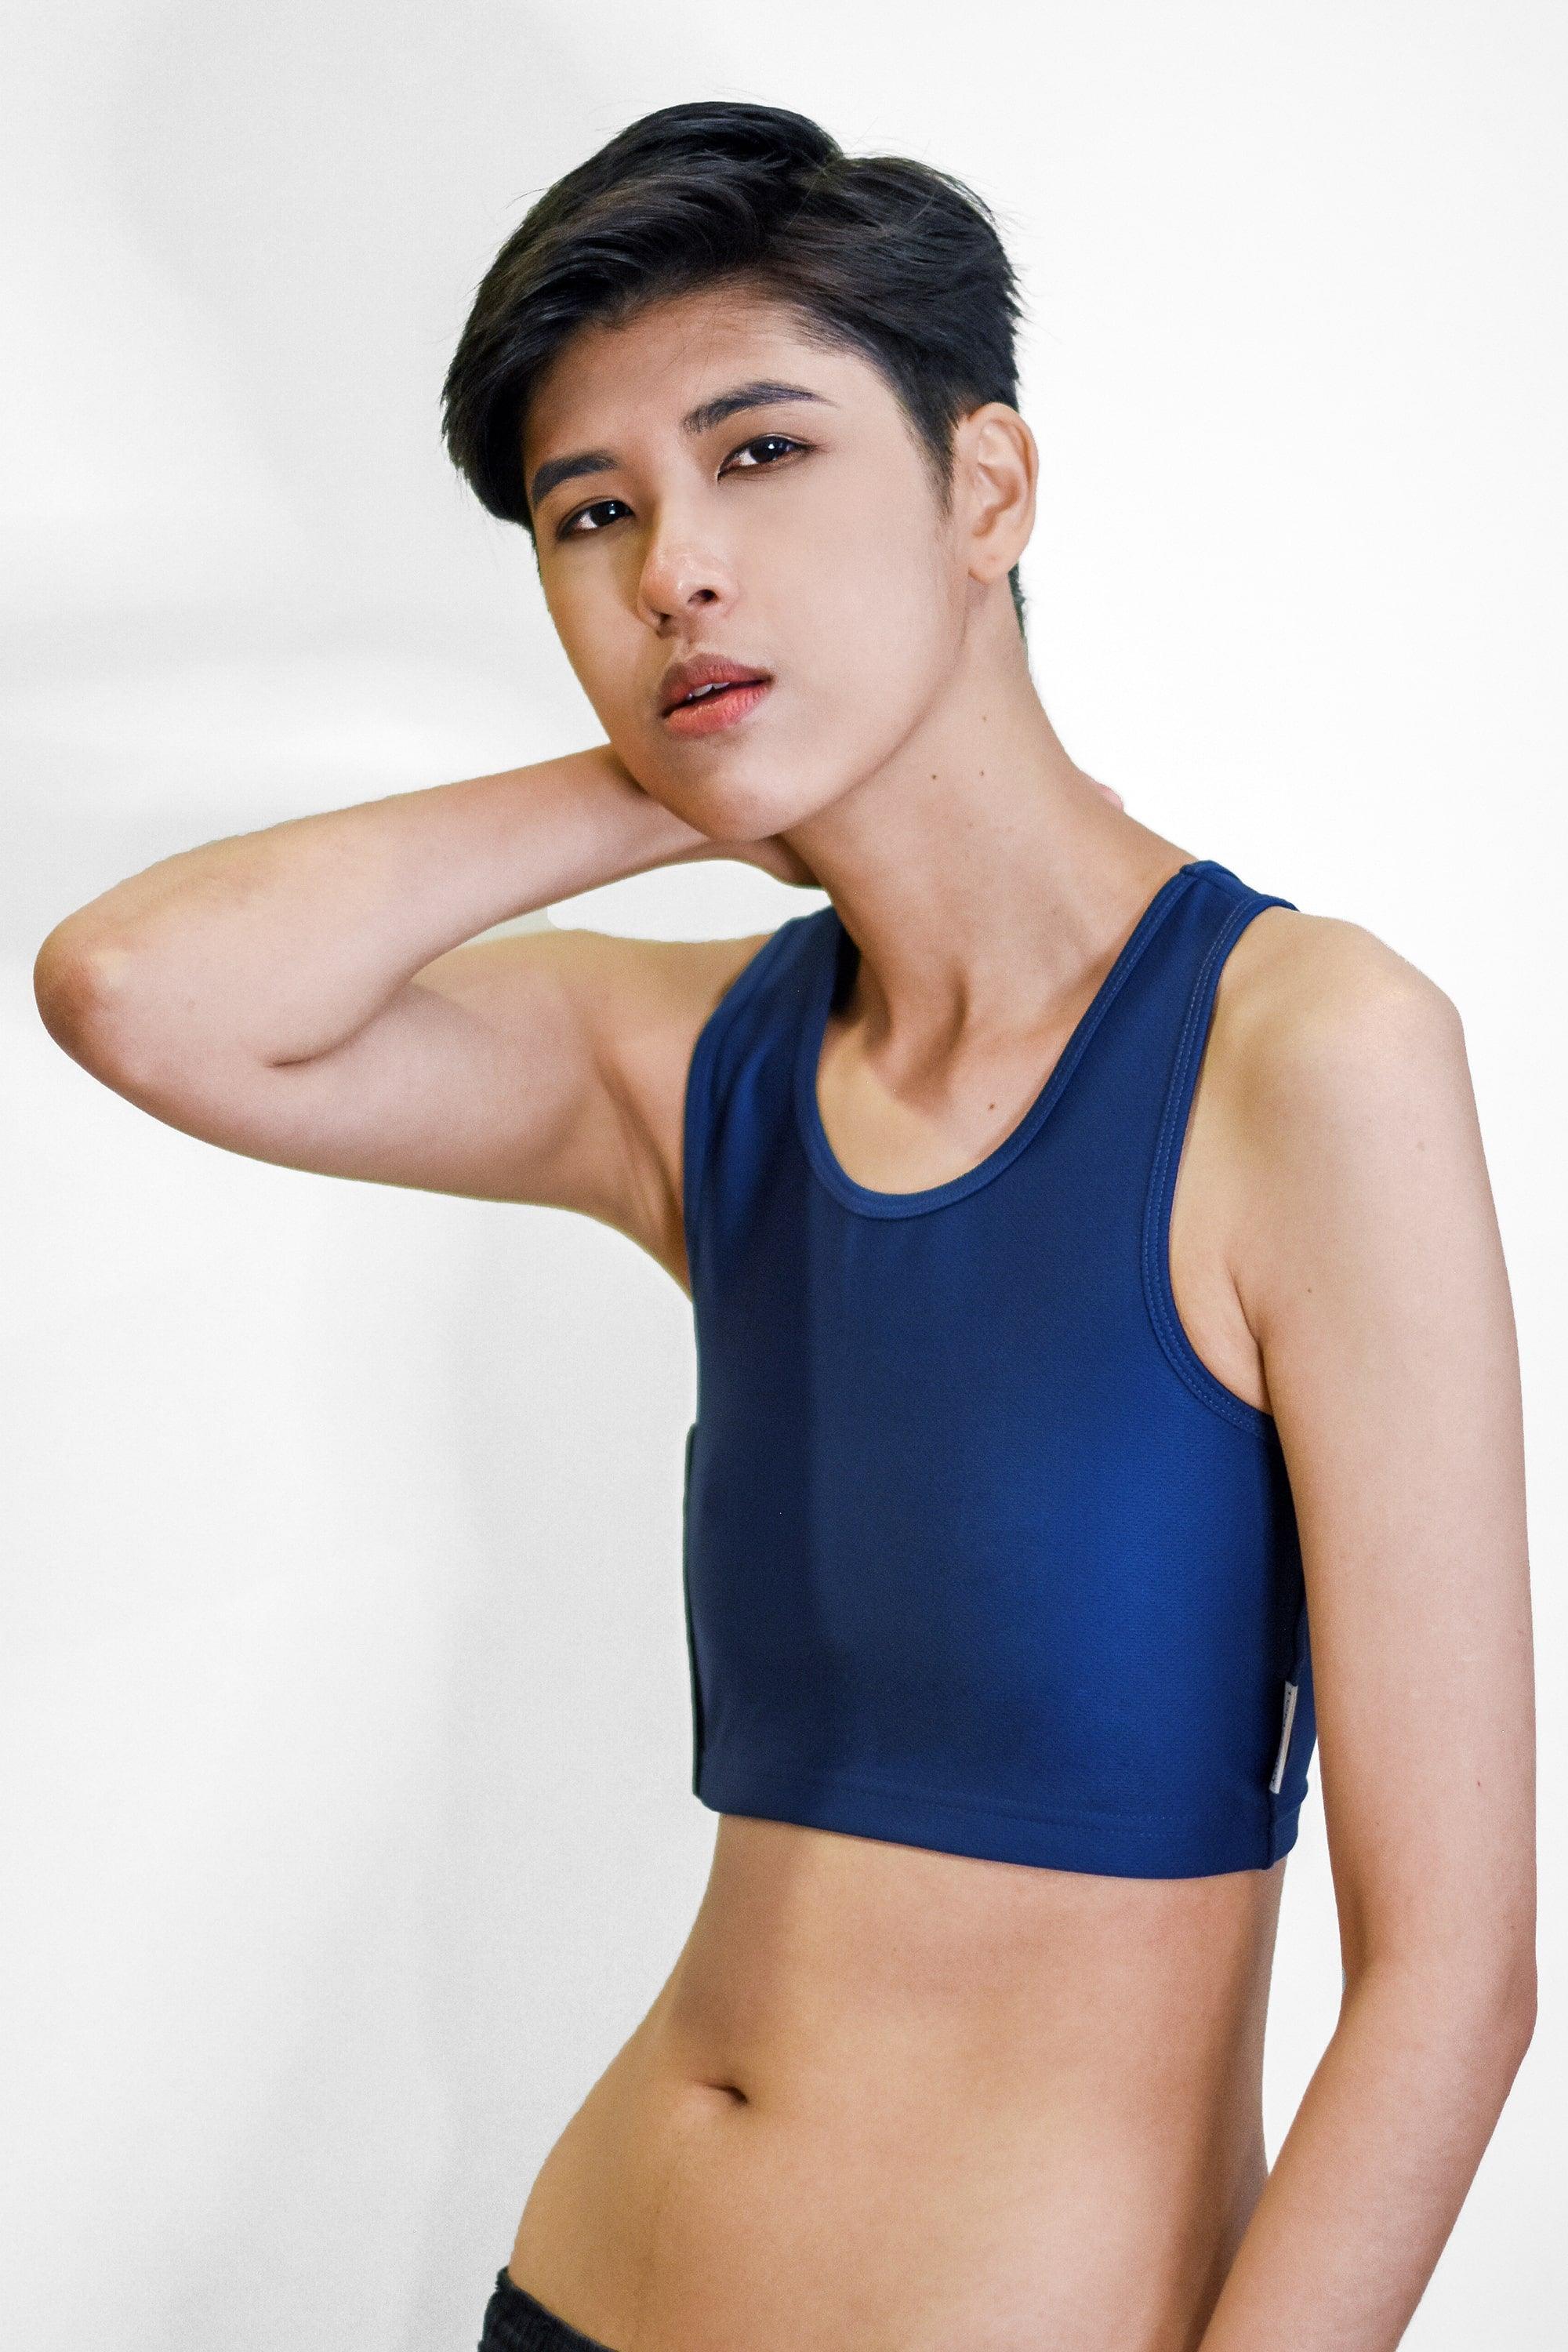 Non-binary Tomboy in a navy color non-bandage TOMSCOUT Chest Binder, part of the TOMSCOUT ACTIVE BINDER collection, showcasing a clearance binder that's affordable yet high quality.